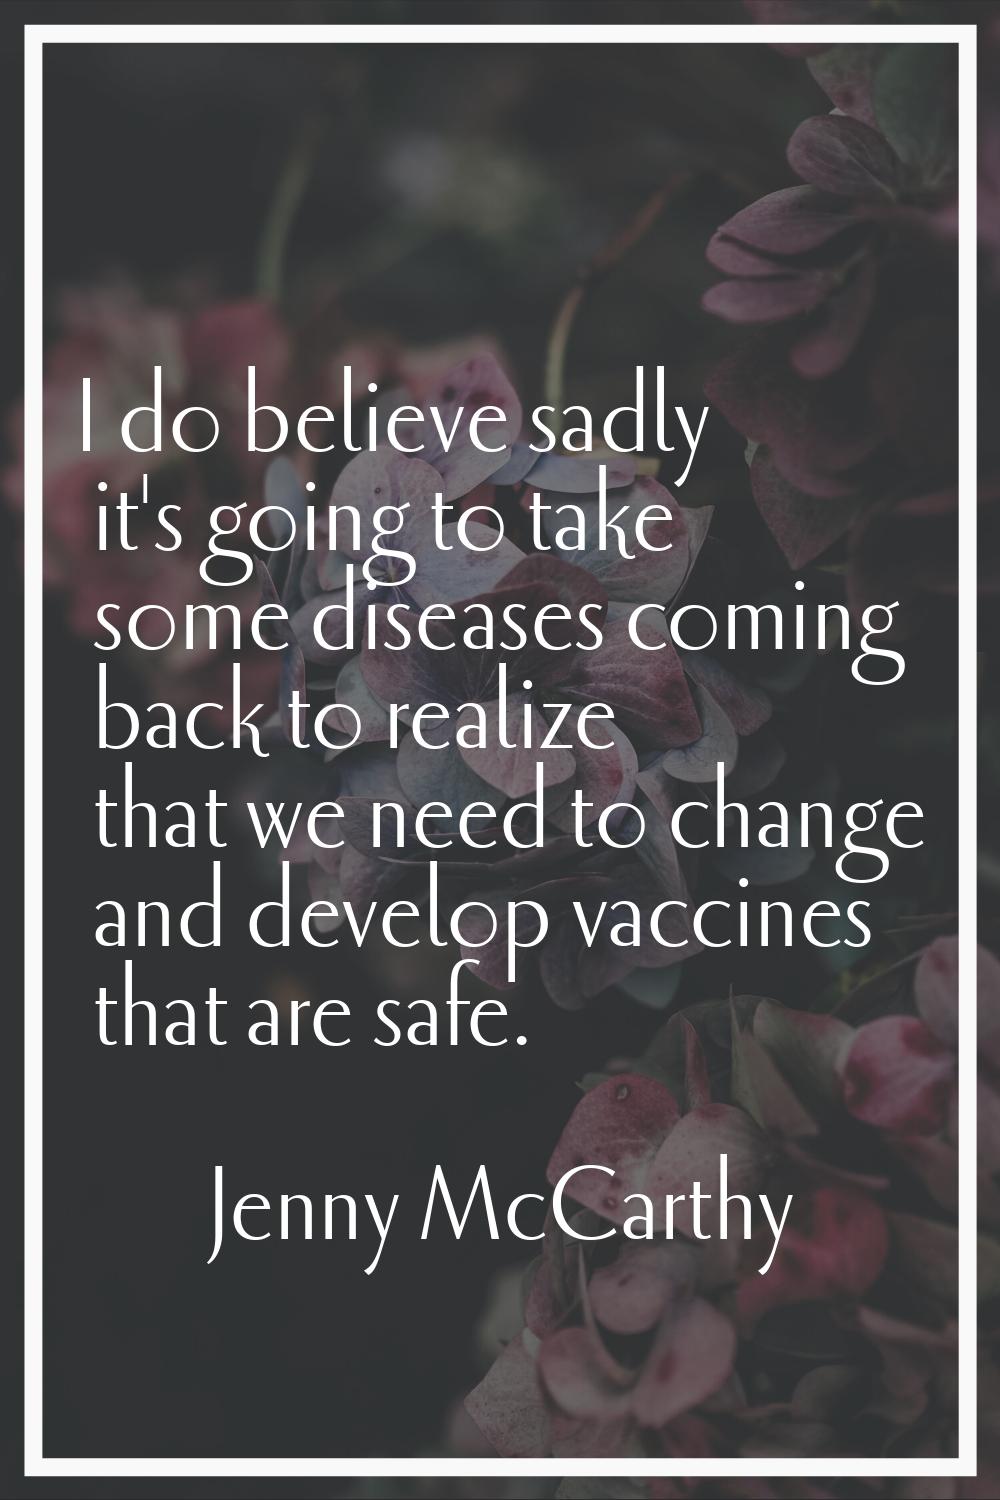 I do believe sadly it's going to take some diseases coming back to realize that we need to change a